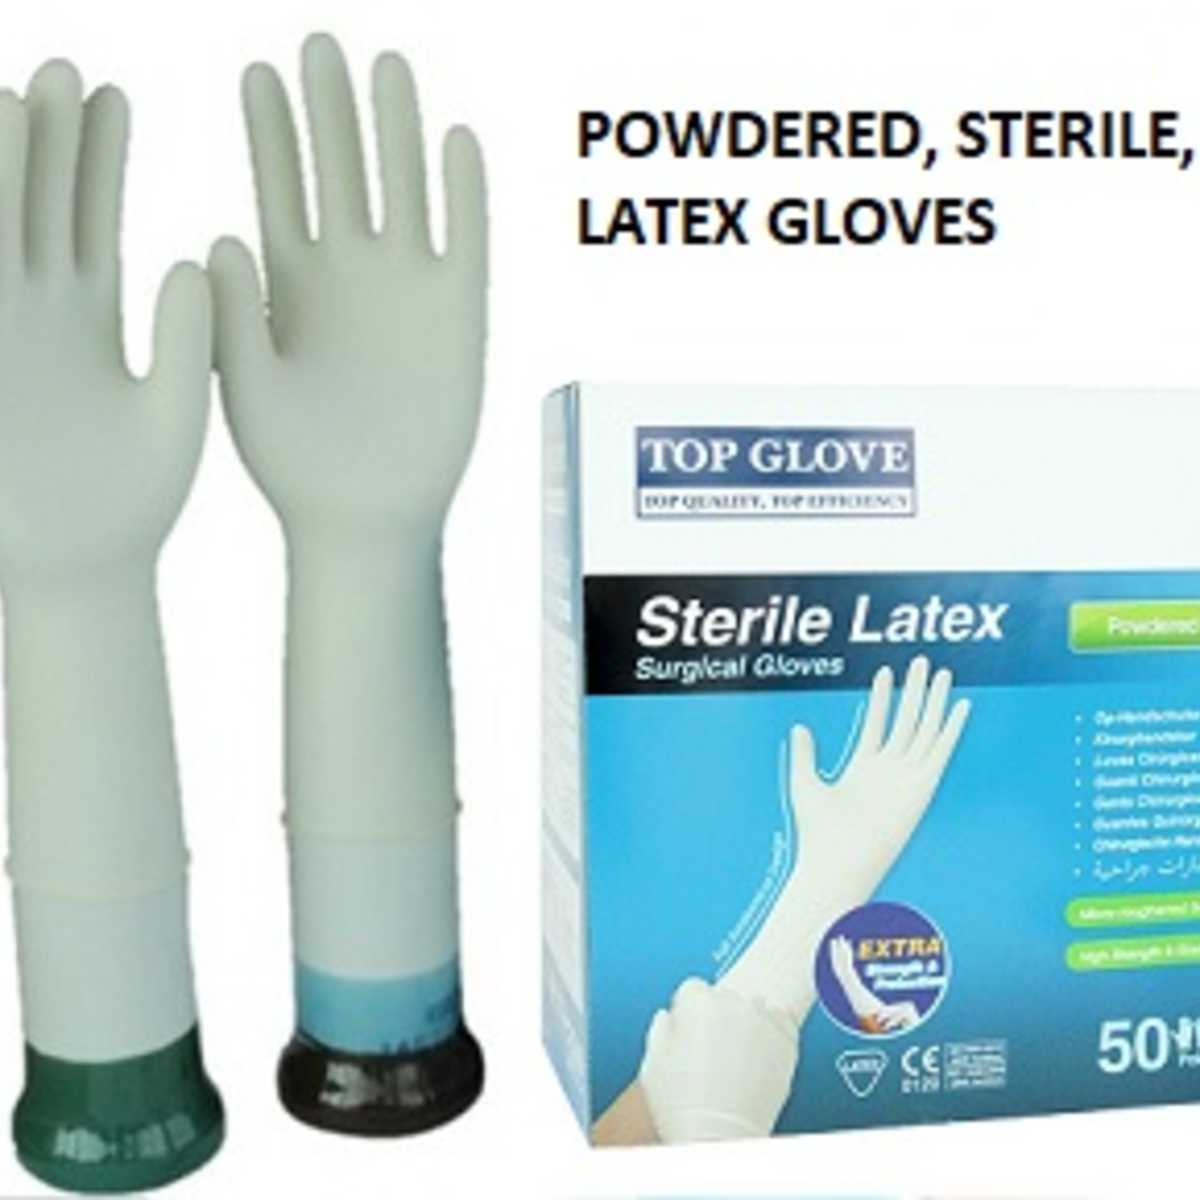 7.0 Sterile Latex Surgical Glove, Powdered